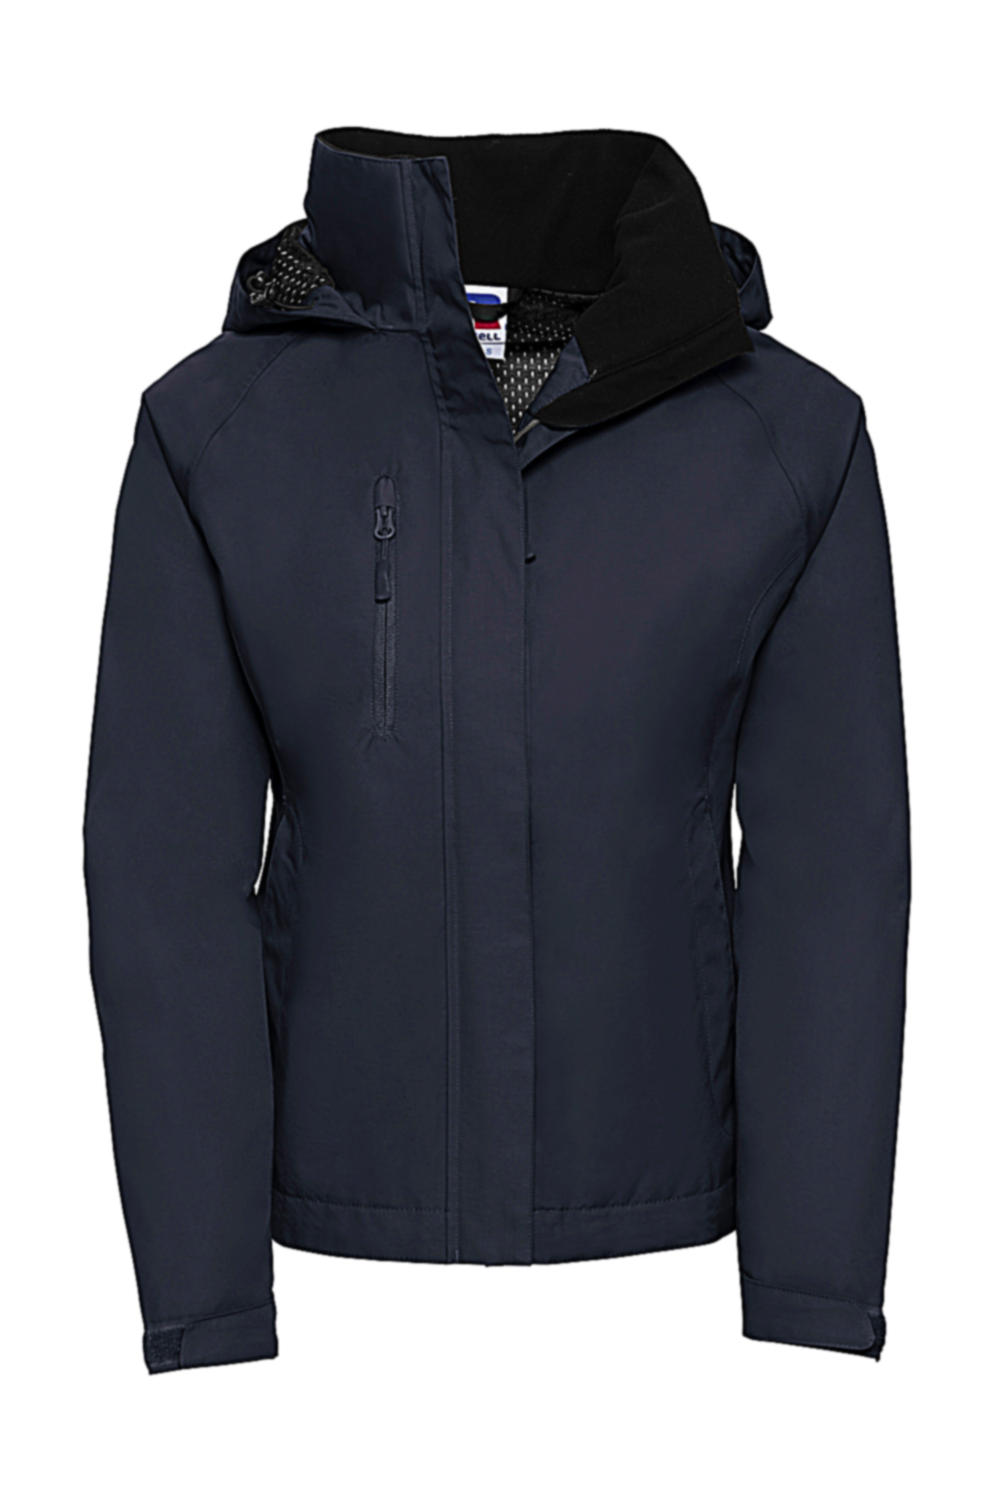  Ladies HydraPlus 2000 Jacket in Farbe French Navy